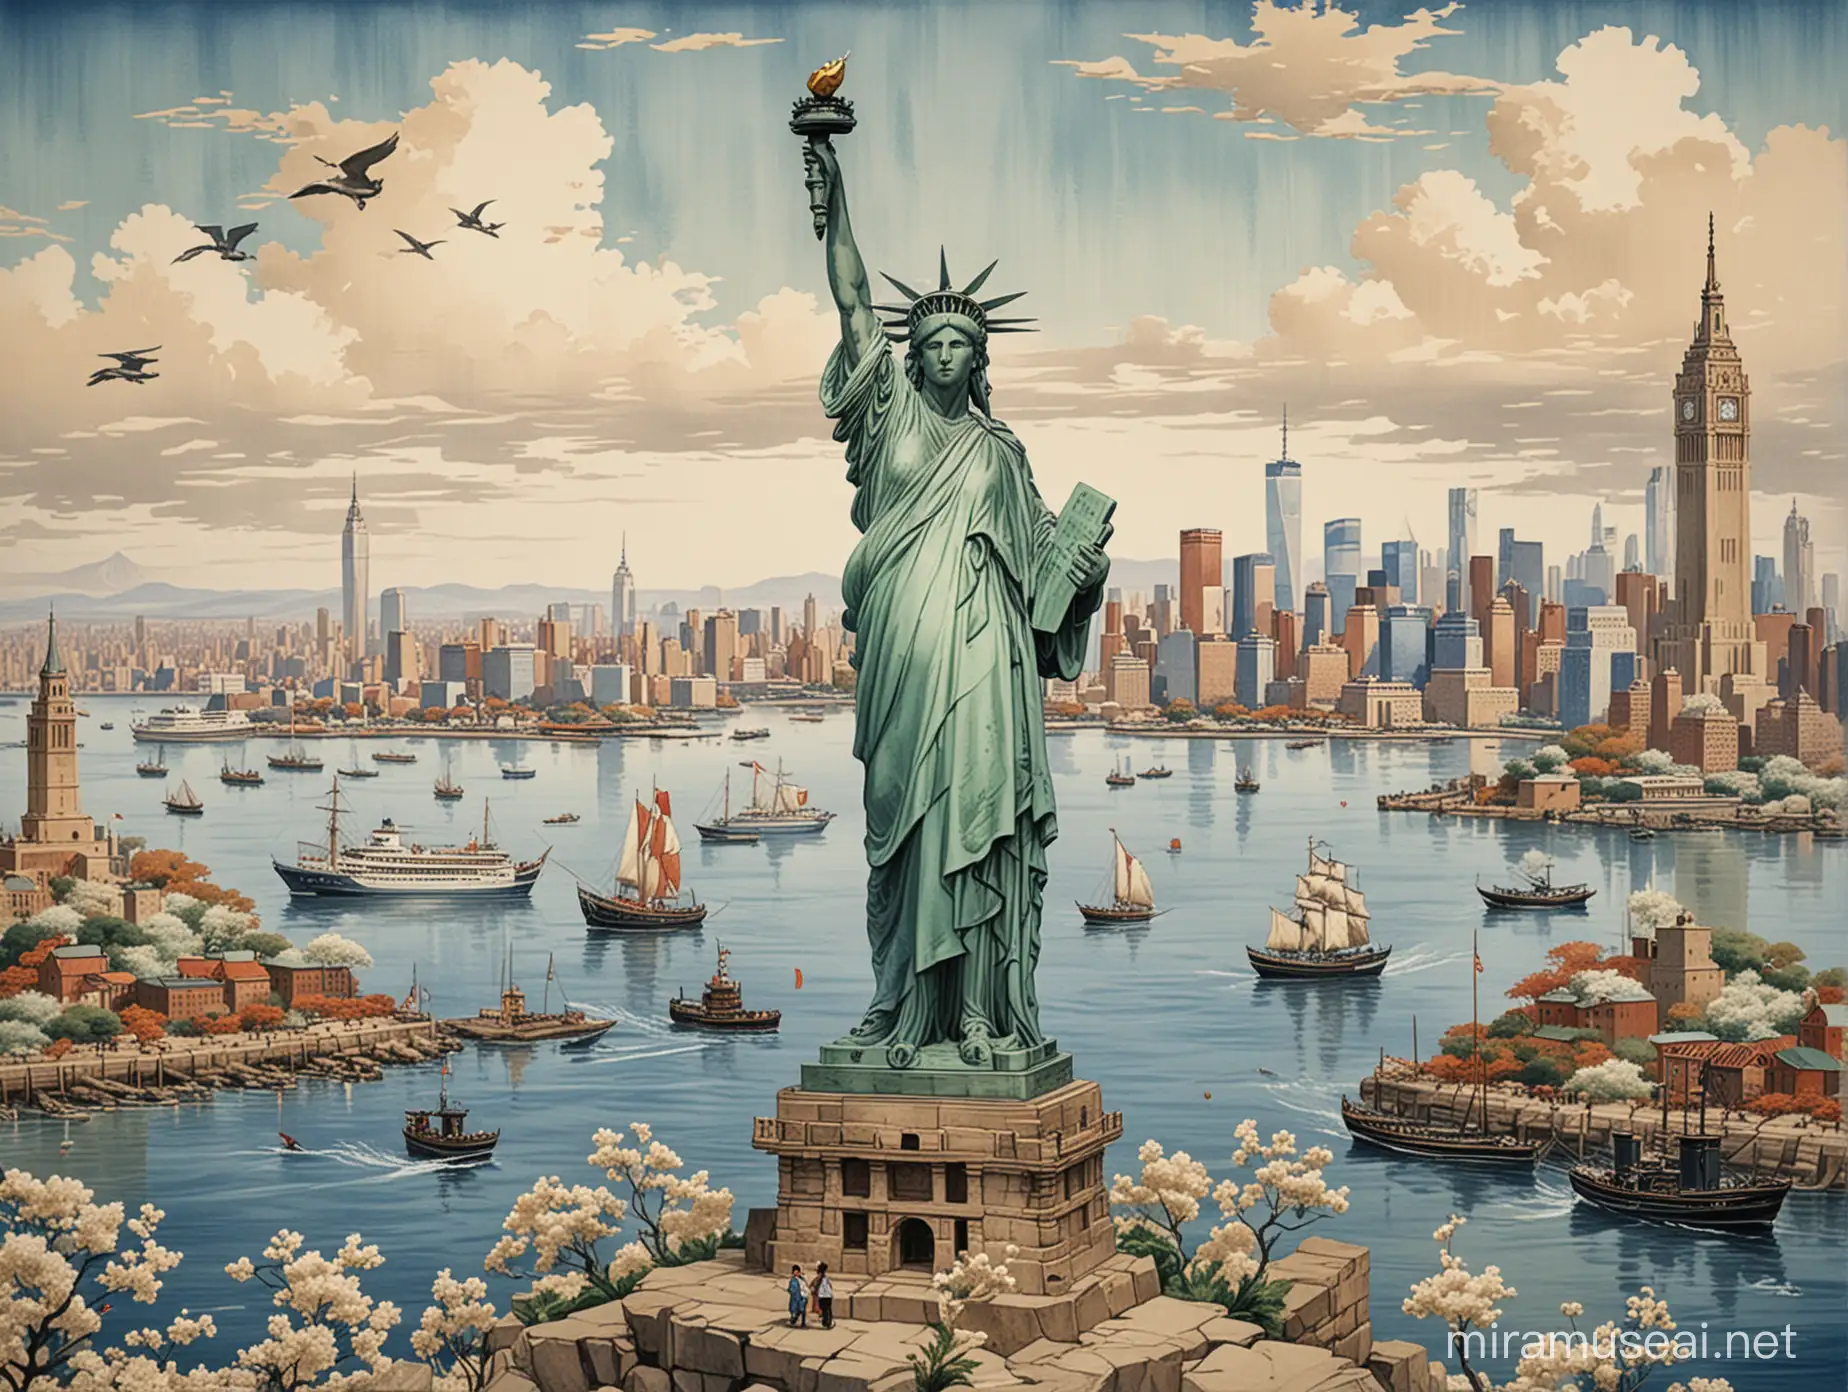 Iconic Statue of Liberty in Japanese Hokusai Style overlooking New York Harbor